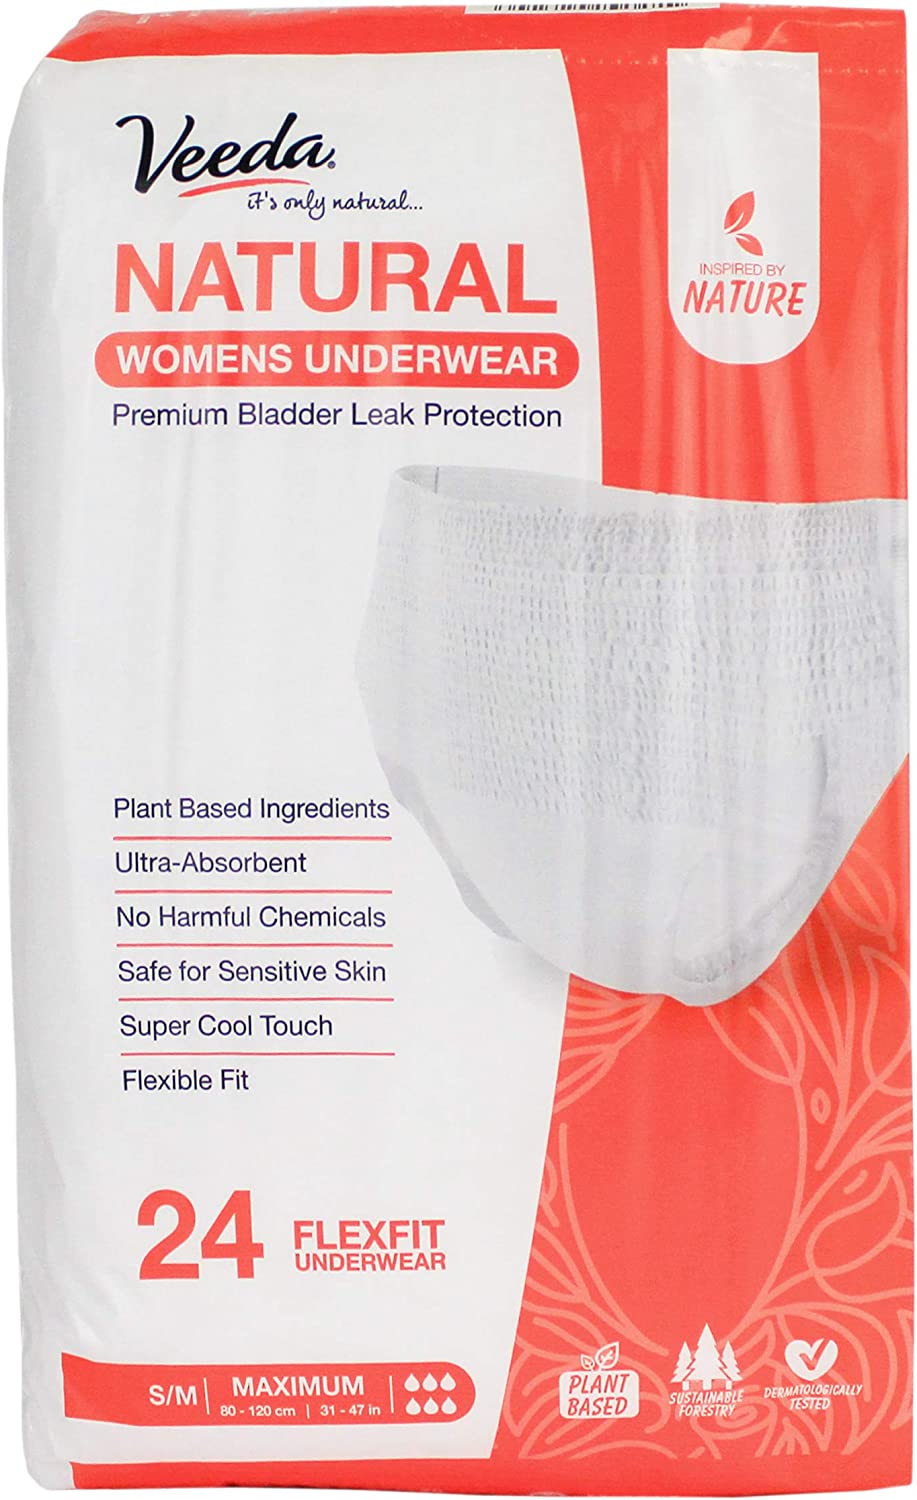 Veeda Natural Premium Incontinence Underwear for Women, for Bladder Leakage Protection, Maximum Absorbency, Small/Medium Size, 24 Count (Pack of 1)